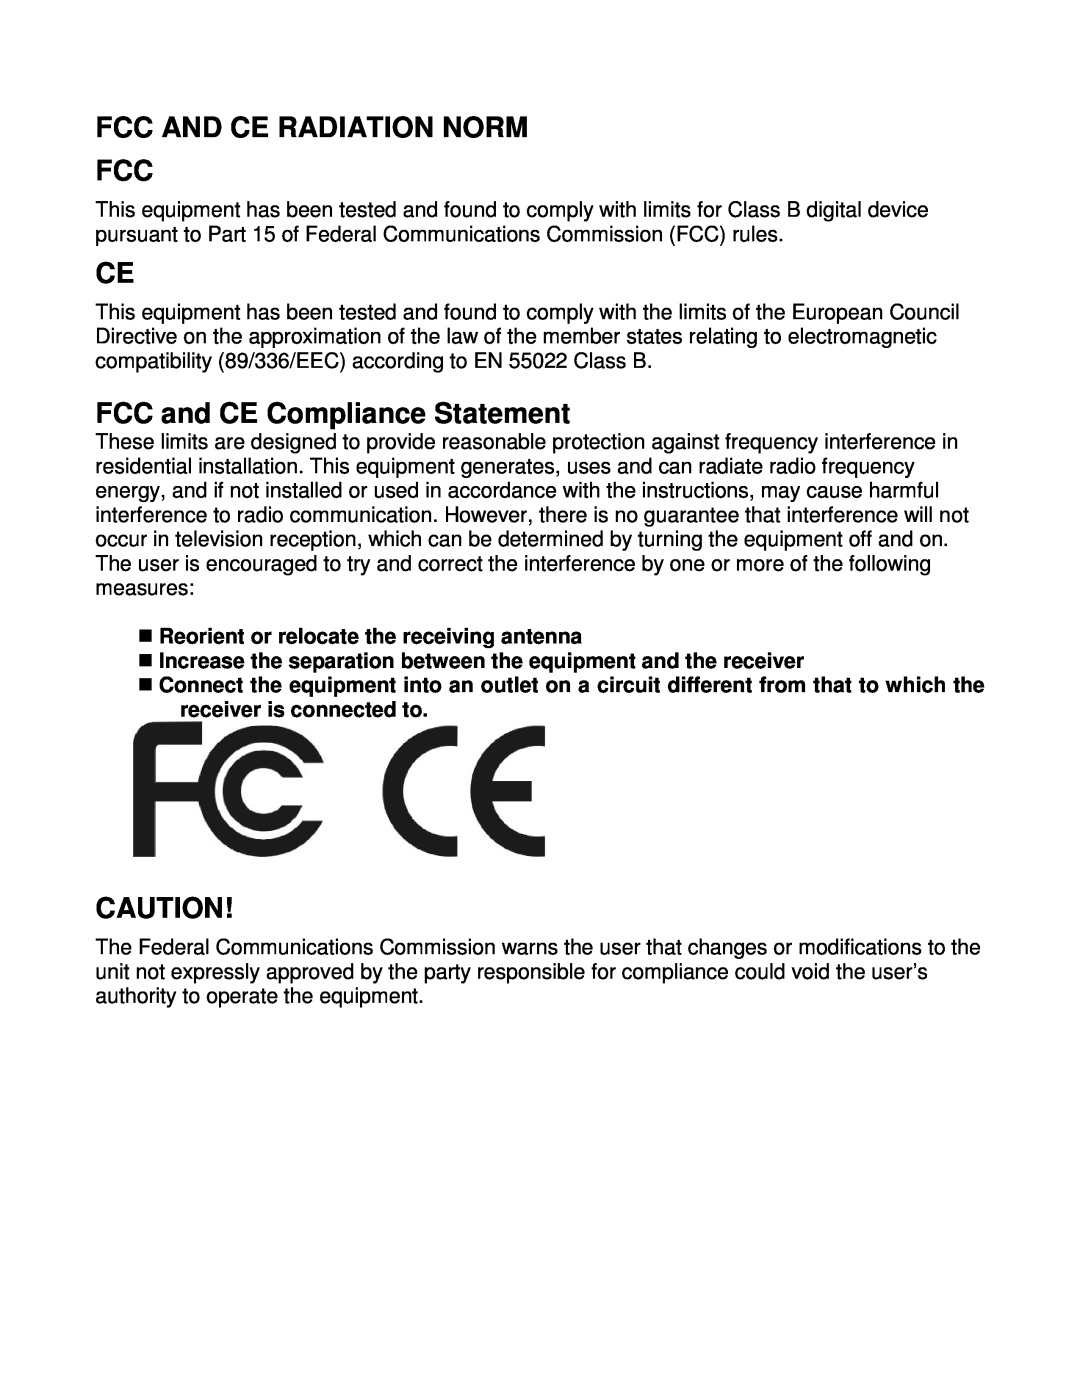 Compaq 61000101 Fcc And Ce Radiation Norm Fcc, FCC and CE Compliance Statement, Reorient or relocate the receiving antenna 